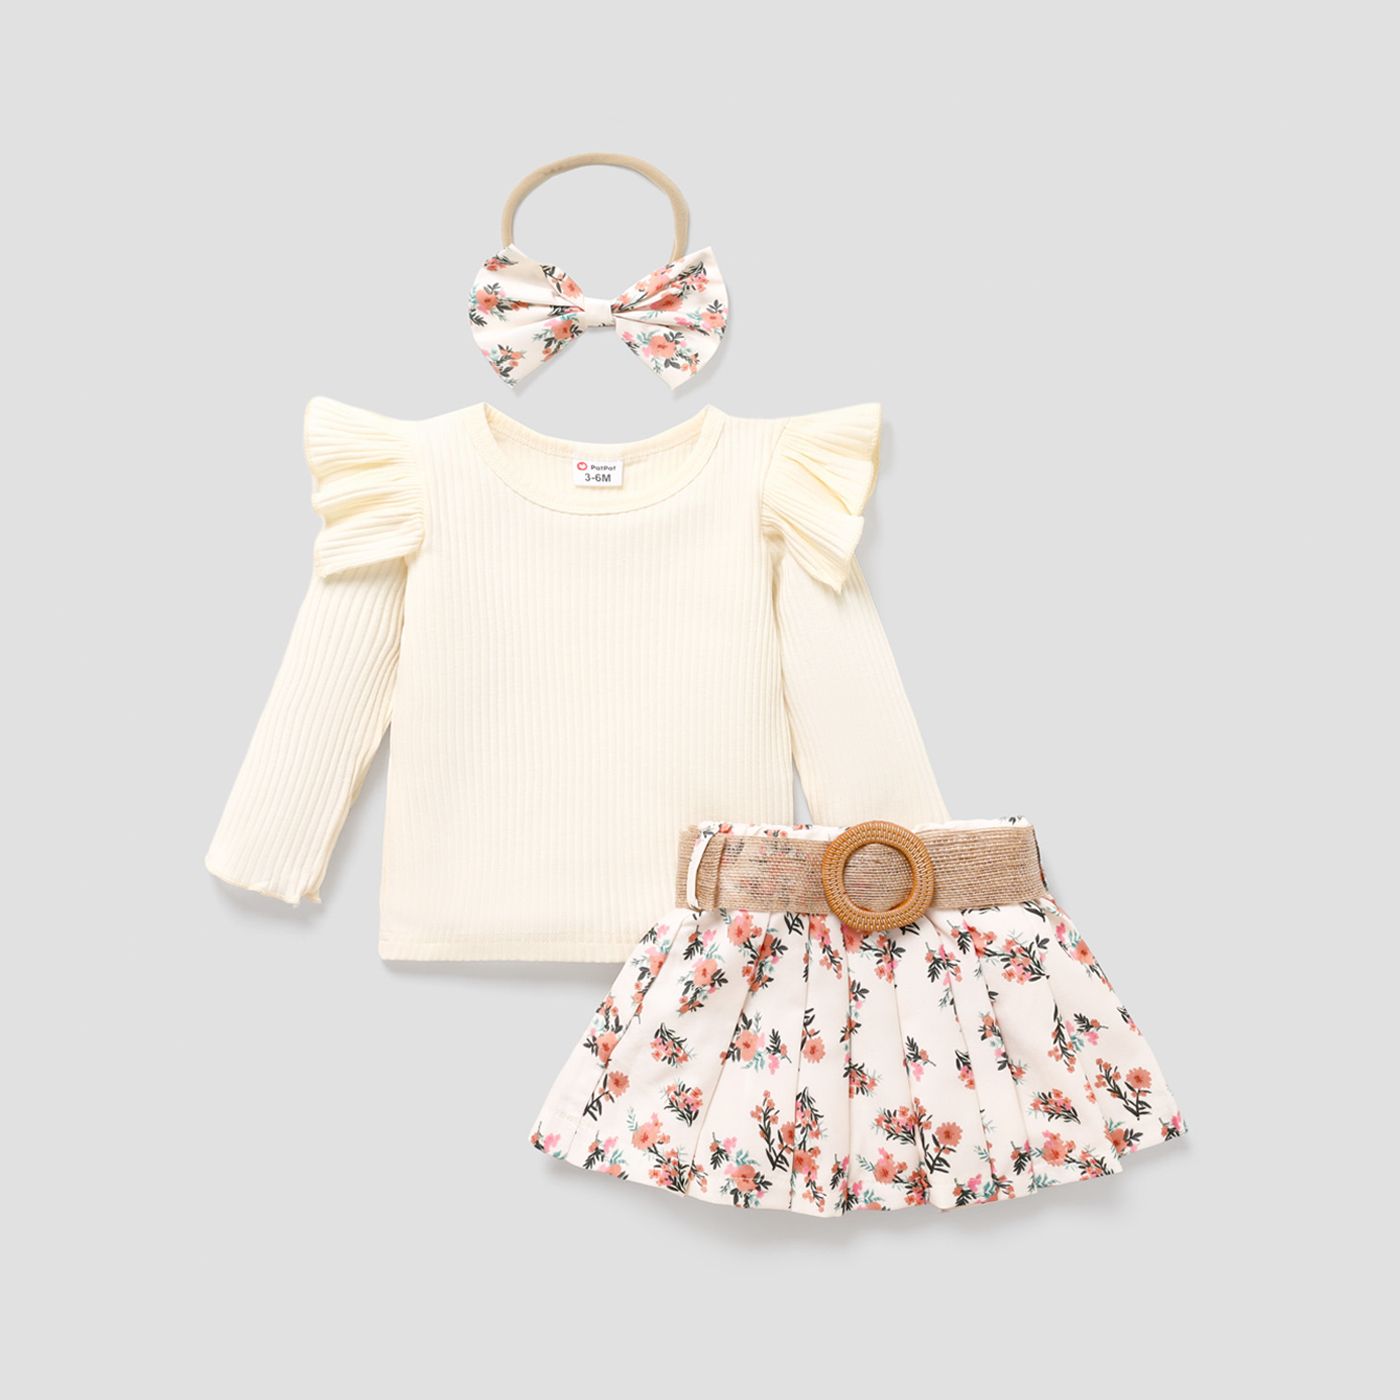 3PCS Baby Girl Sweet Plants And Floral Ruffle Edge Dress Set